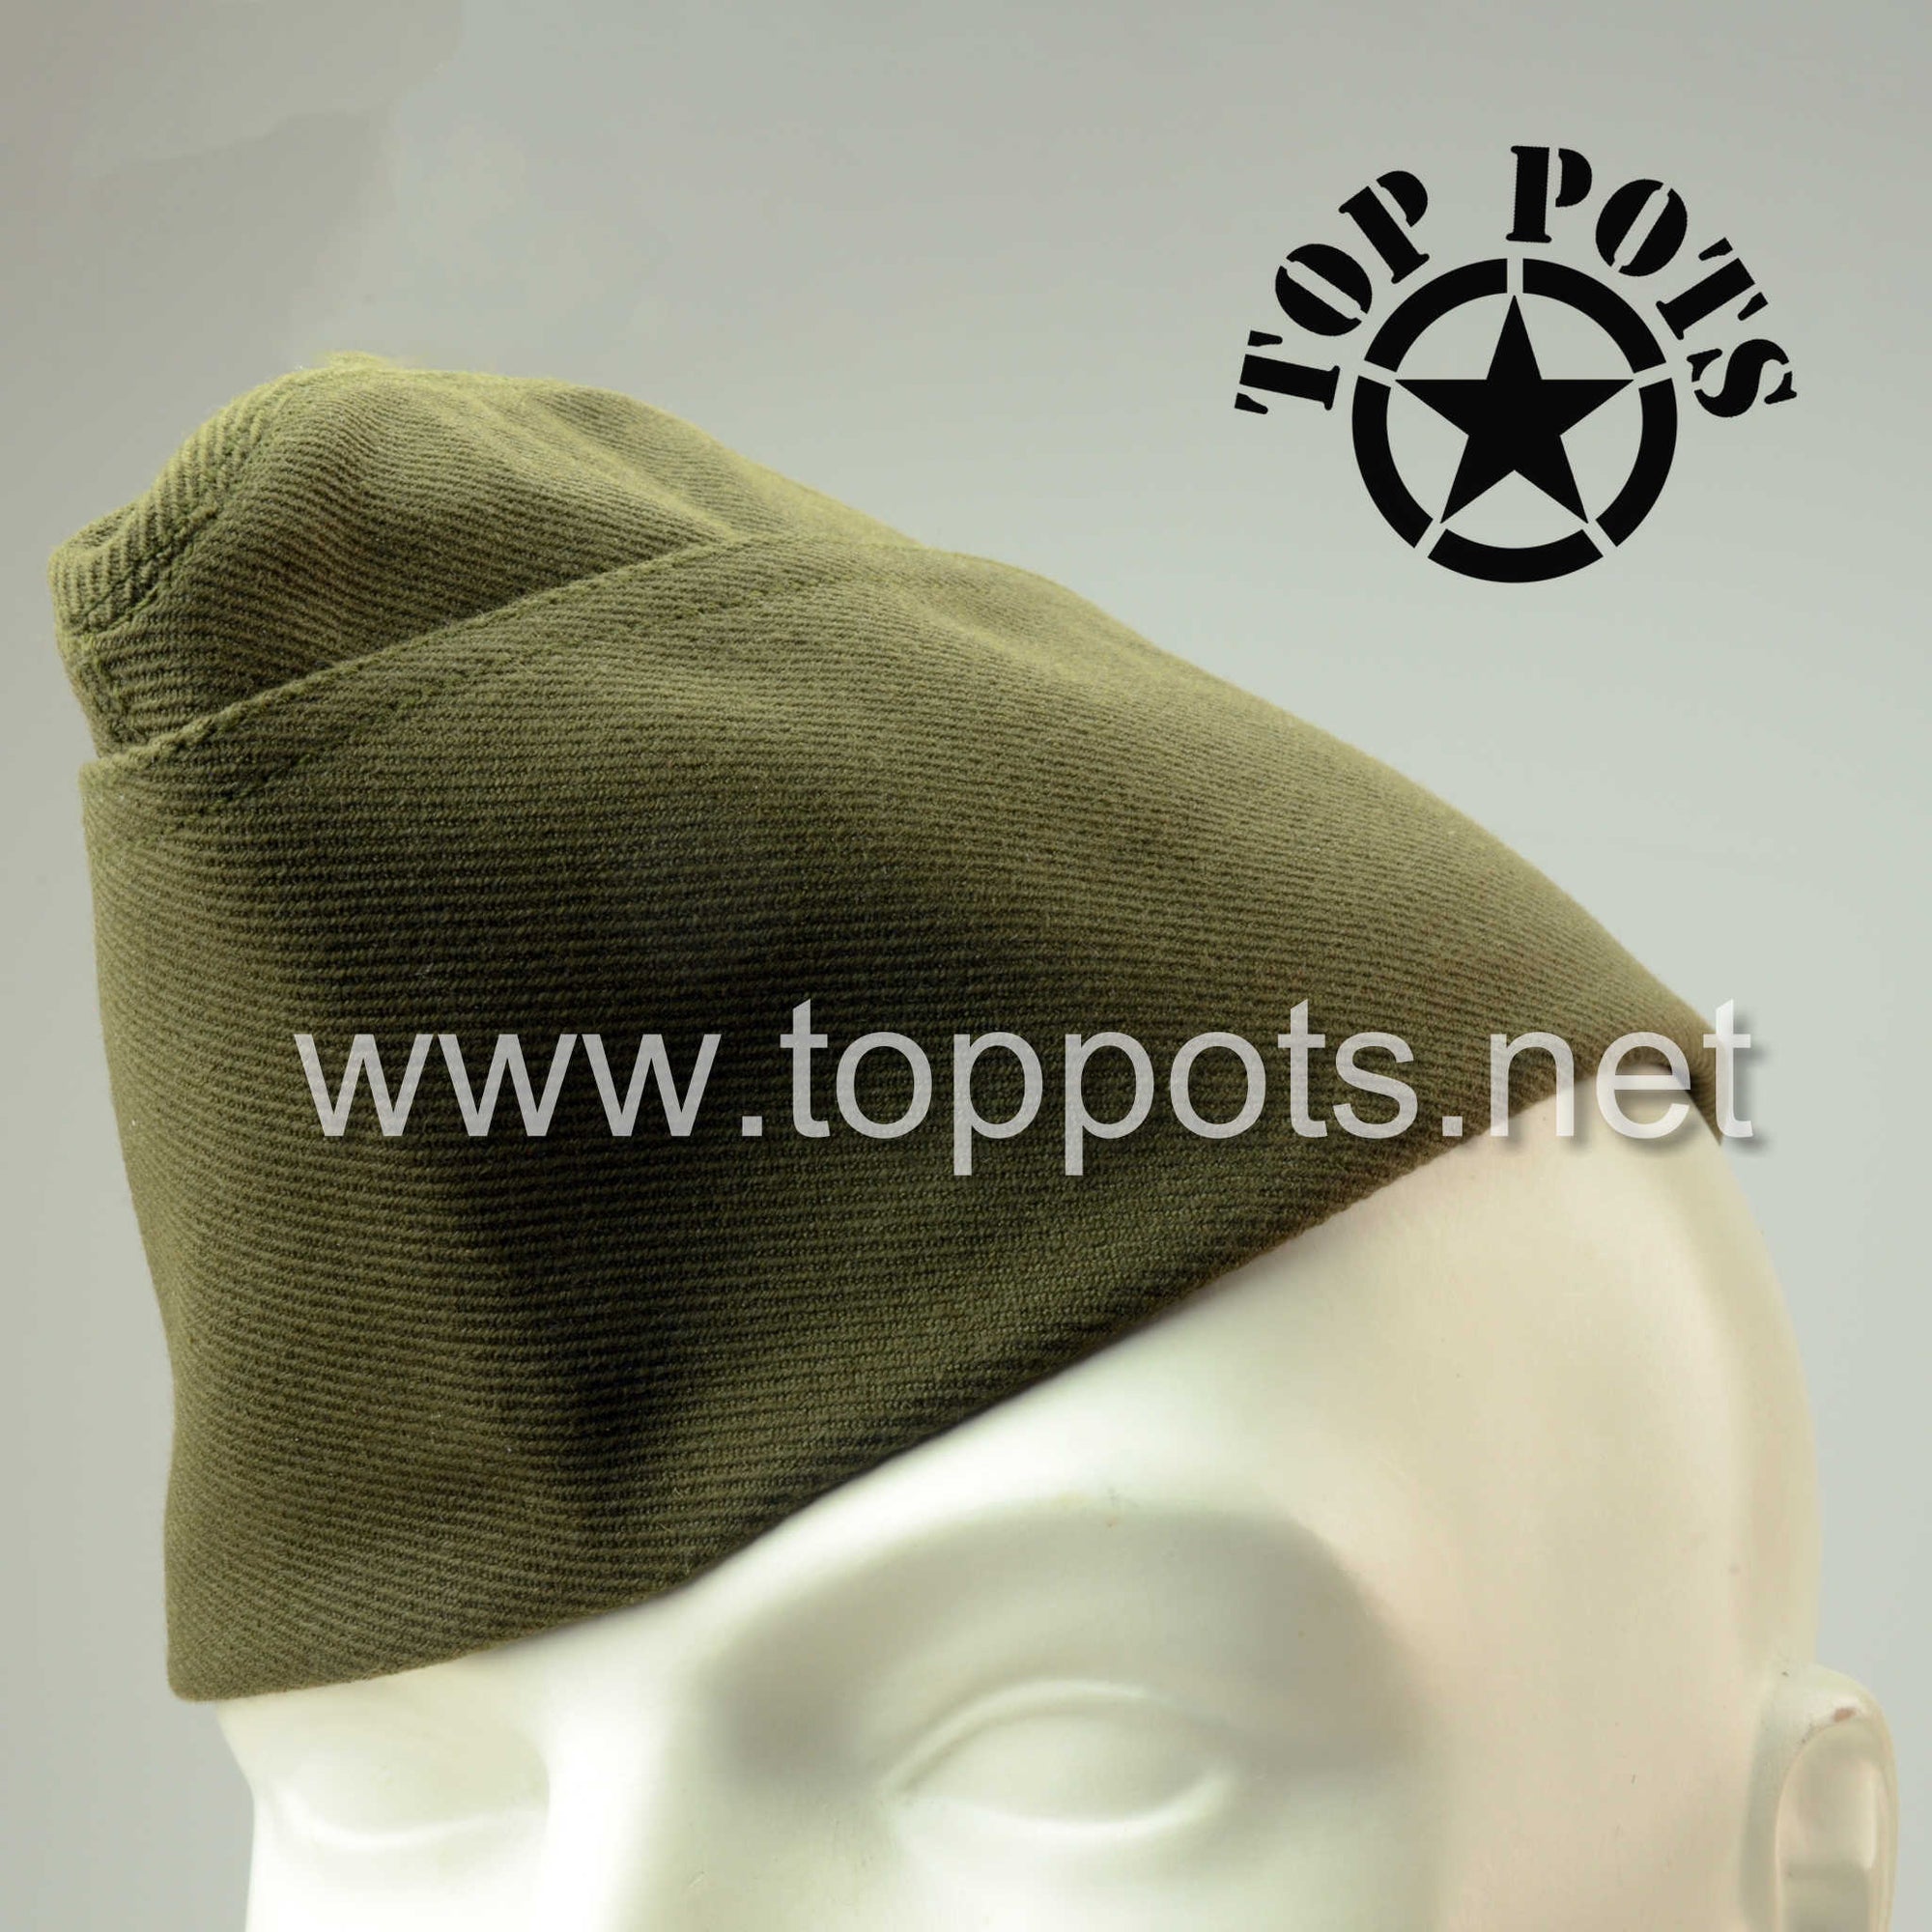 WWI US Army Reproduction American Doughboy Wool Officer Uniform Whipcord Overseas Side Cap